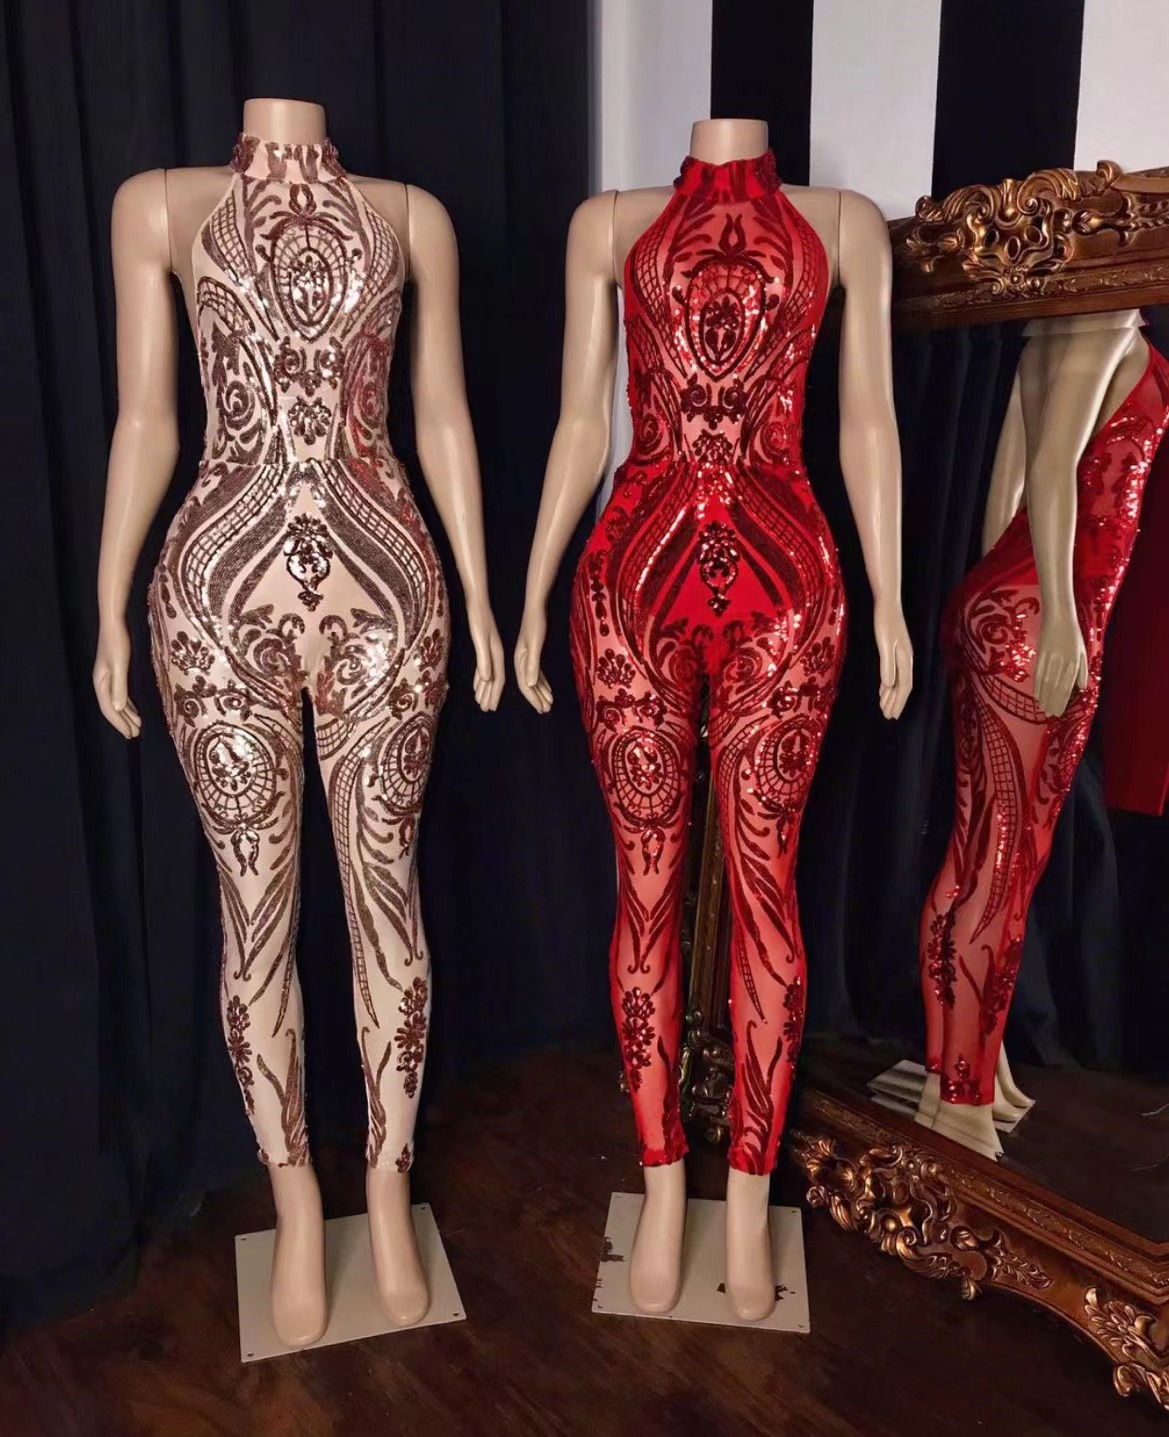 Jumpsuit For Weddings, Sparkly Dresses For Black Girls, Rose Gold Outfit For Women, Formal Dresses, Pant Suit For Women, Red Sparkly Jumpsuit,